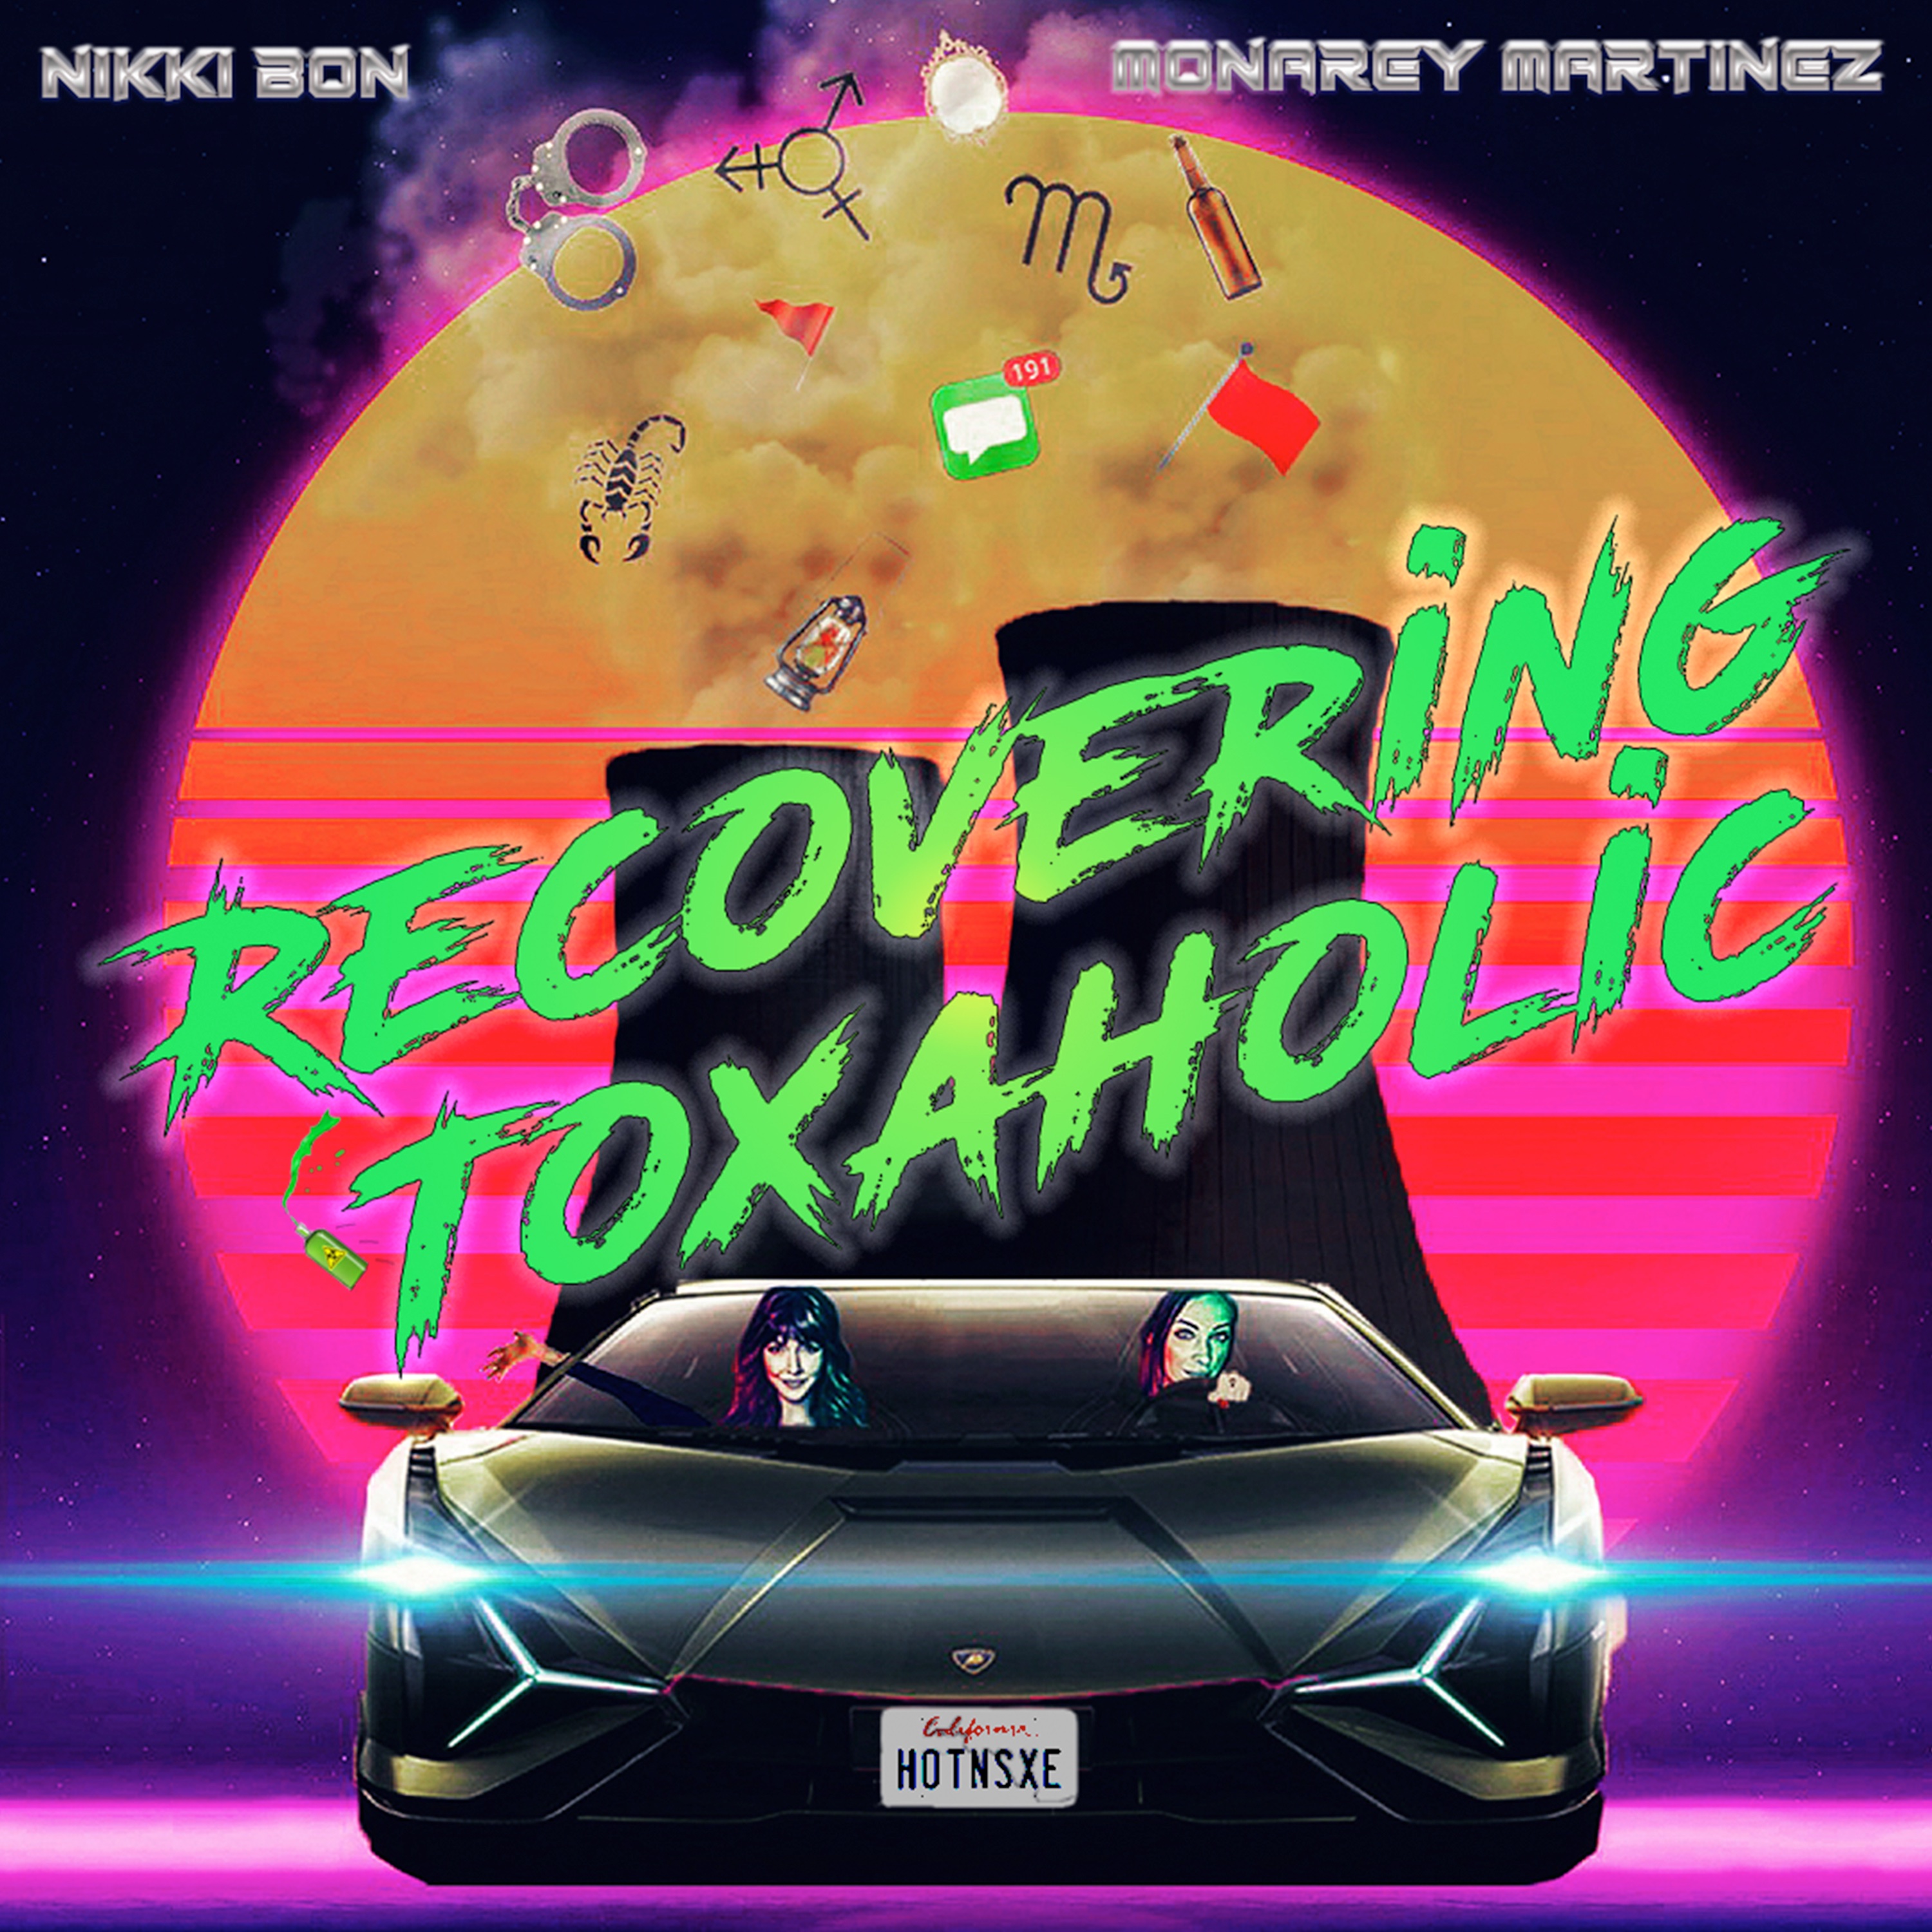 Artwork for Recovering Toxaholic